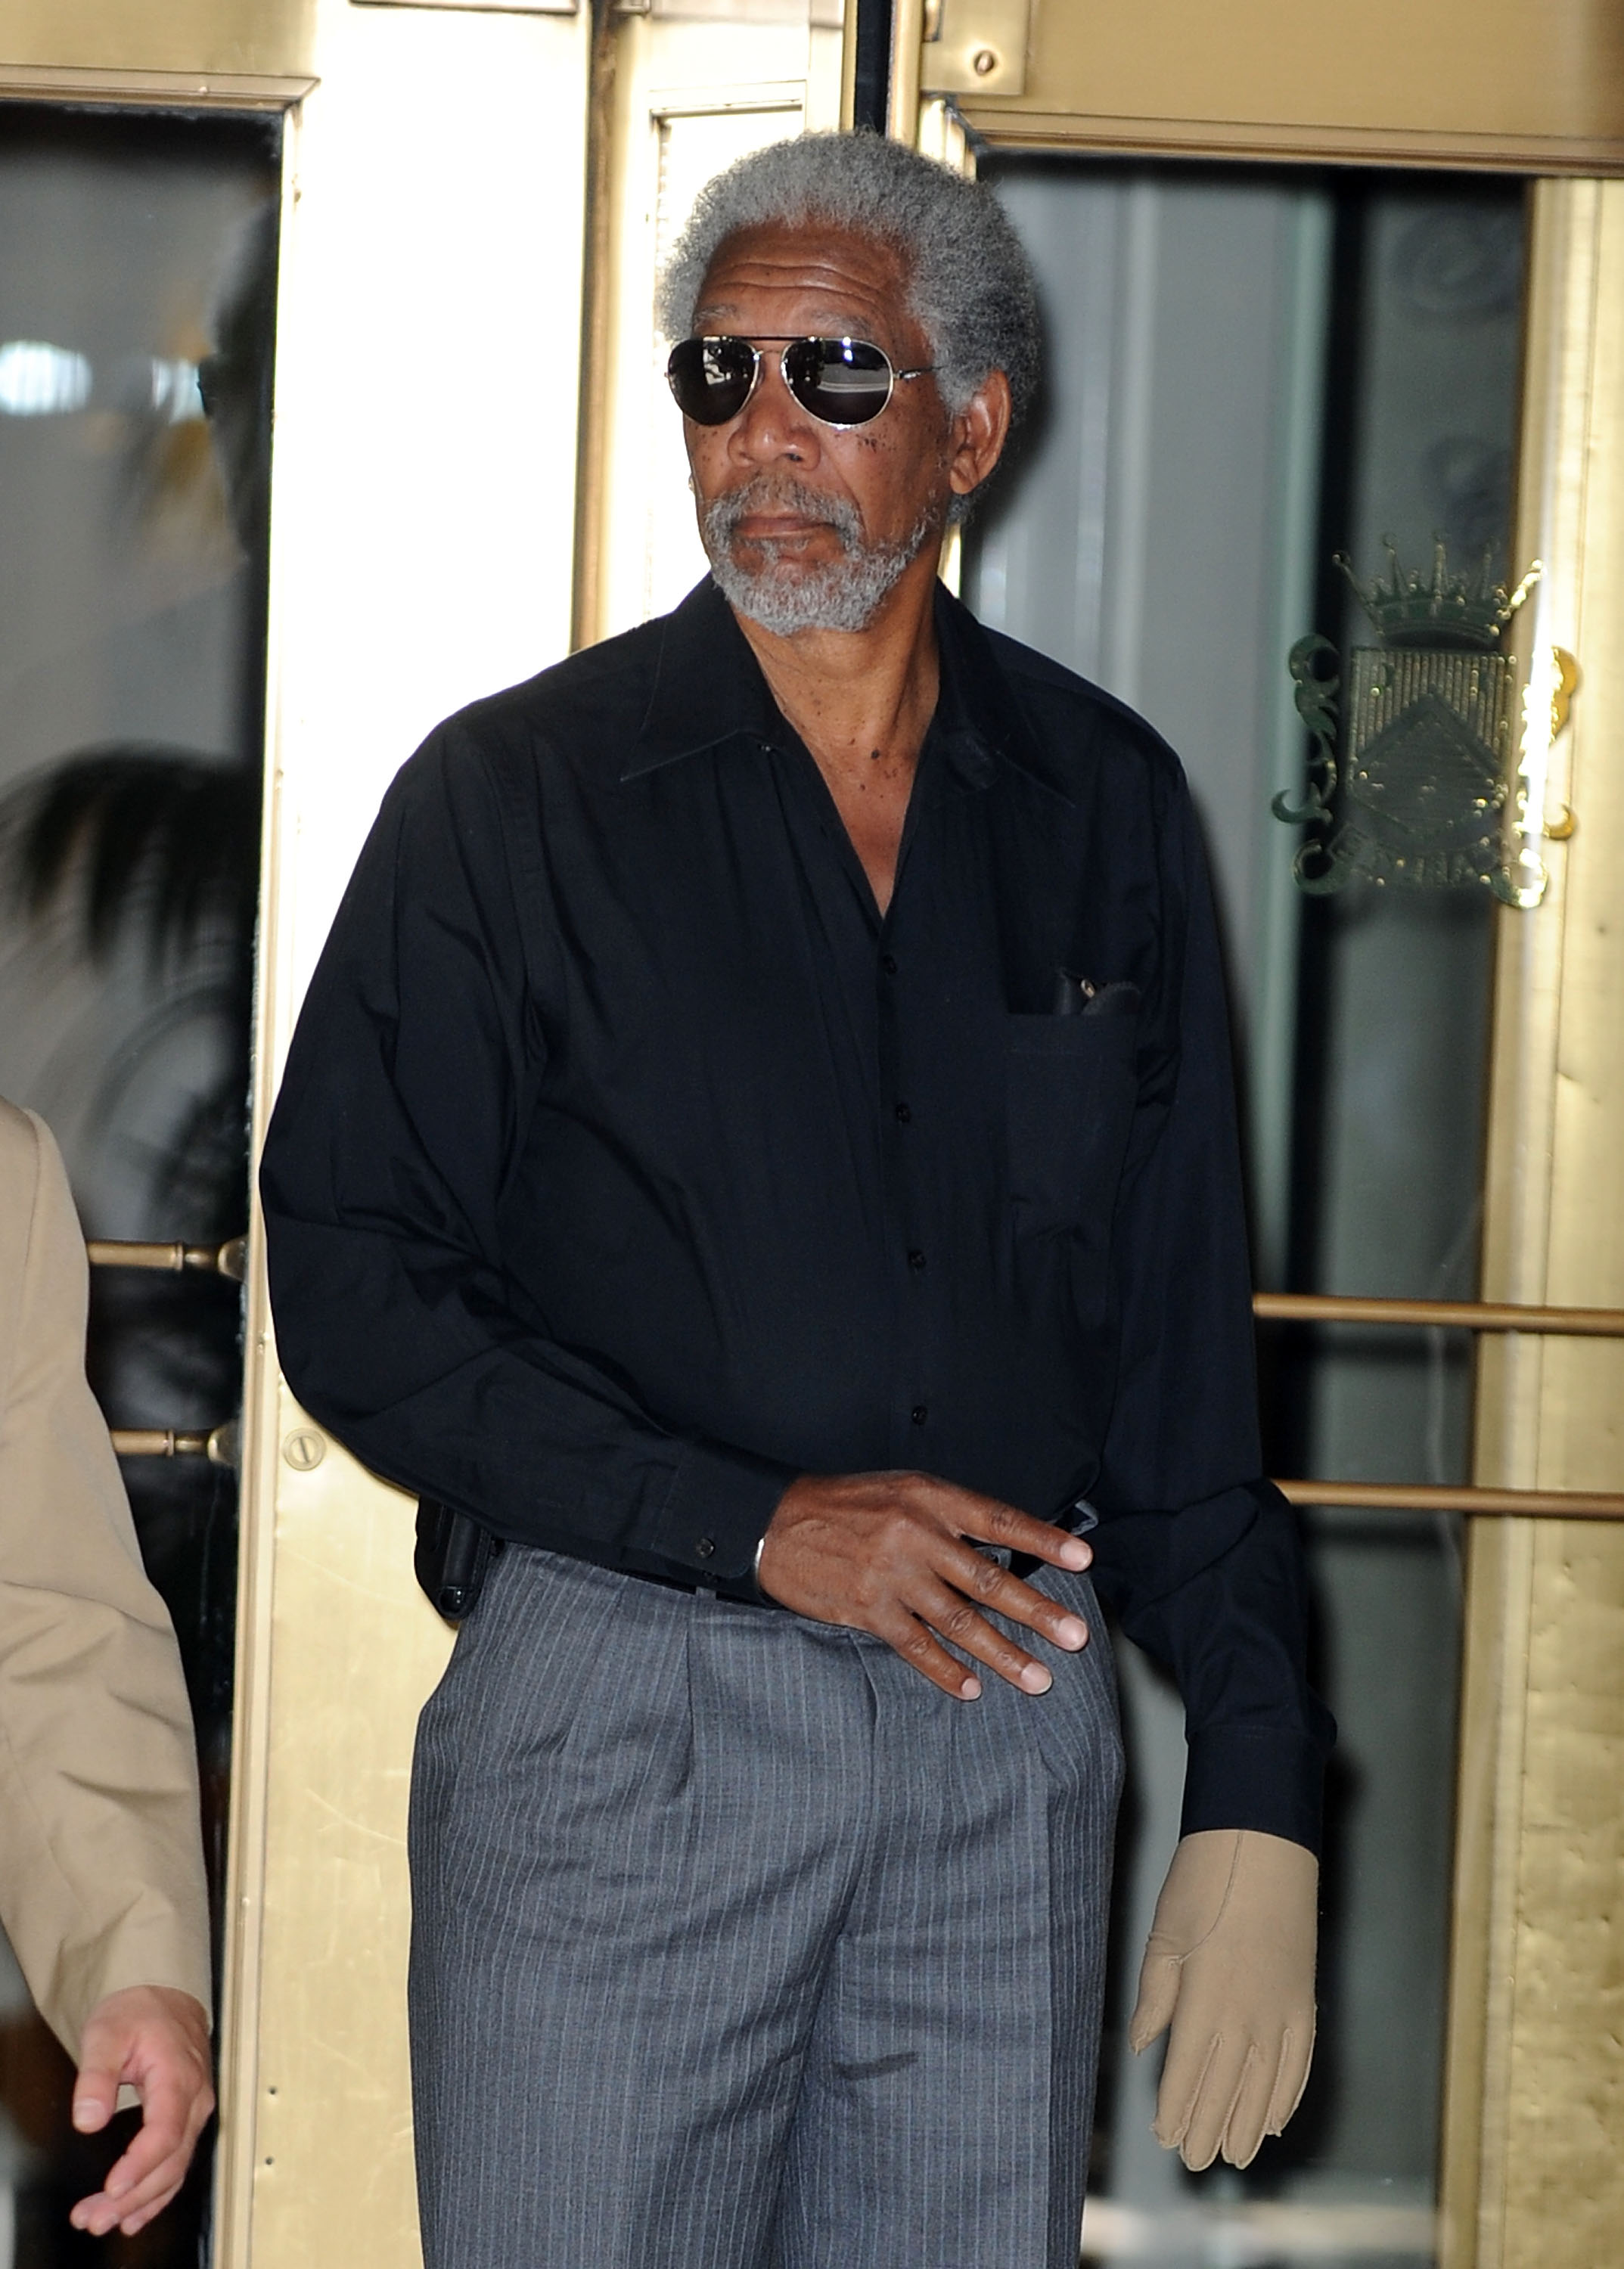 Morgan Freeman in Manhattan on July 18, 2009 in New York City | Source: Getty Images